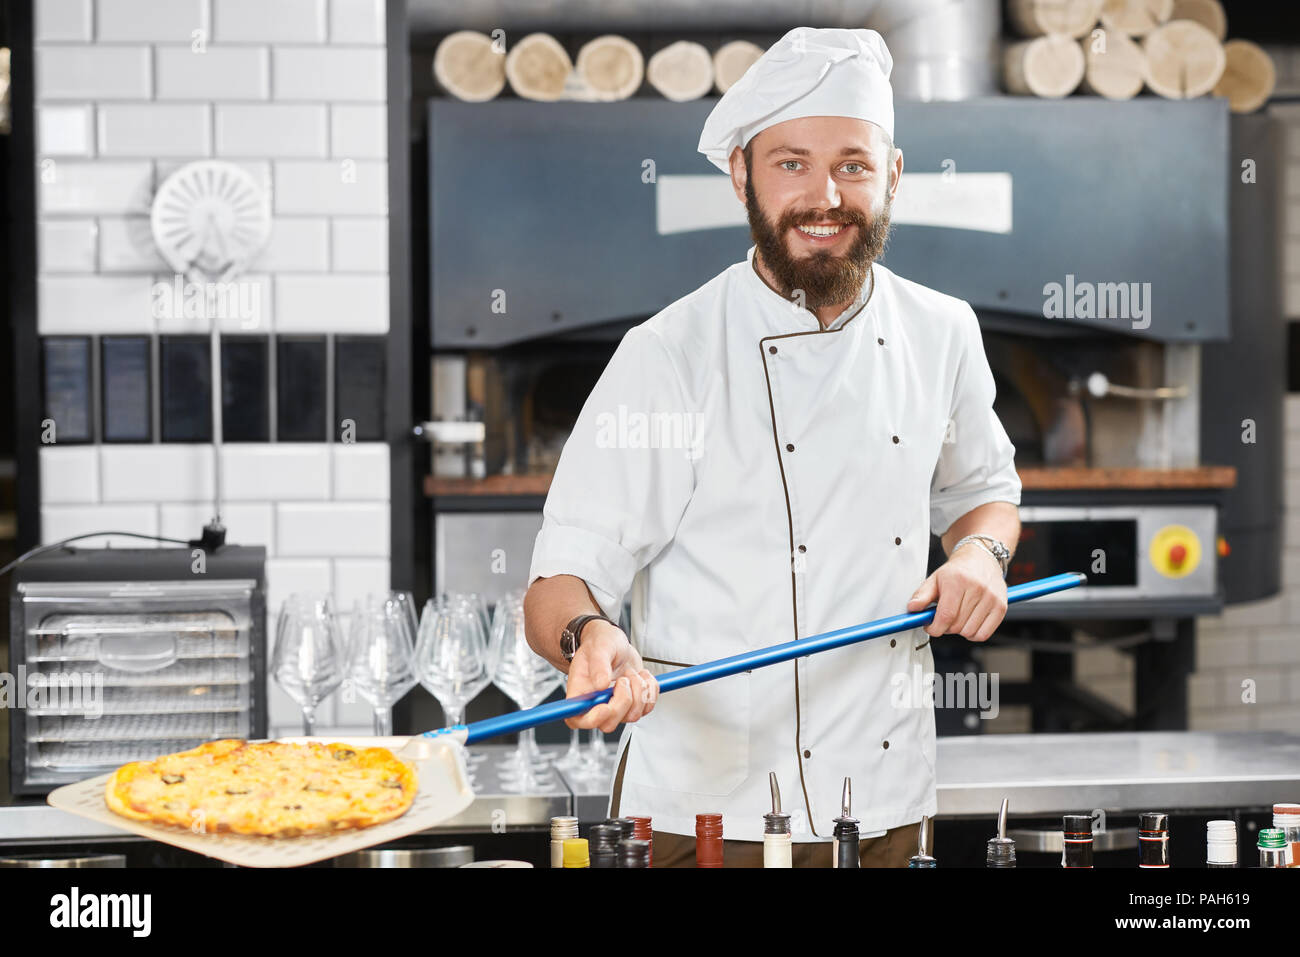 Smiling, happy baker keeping pizza on long blue metallic shovel, looking at camera. Wearing white chef's tunic and a cap,looking at camera. Working in restaurant's kitchen with alcohol shelves nearby. Stock Photo